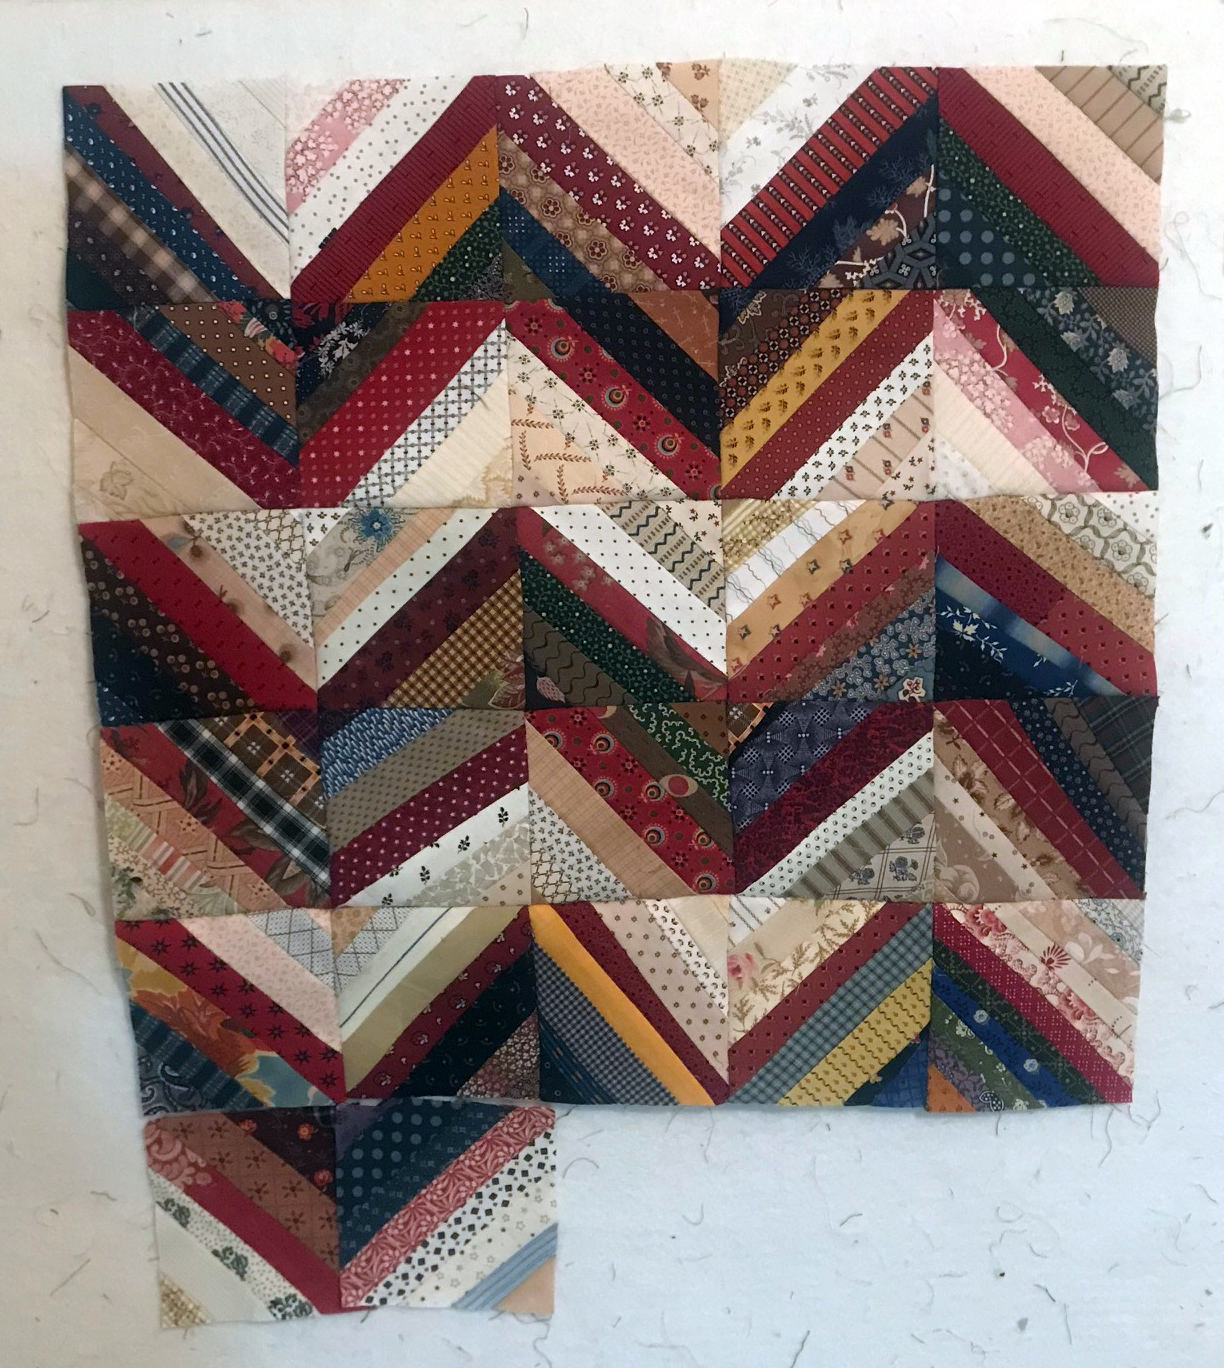 Humble Quilts: Stringalong 2019 Month 1 Linky party!